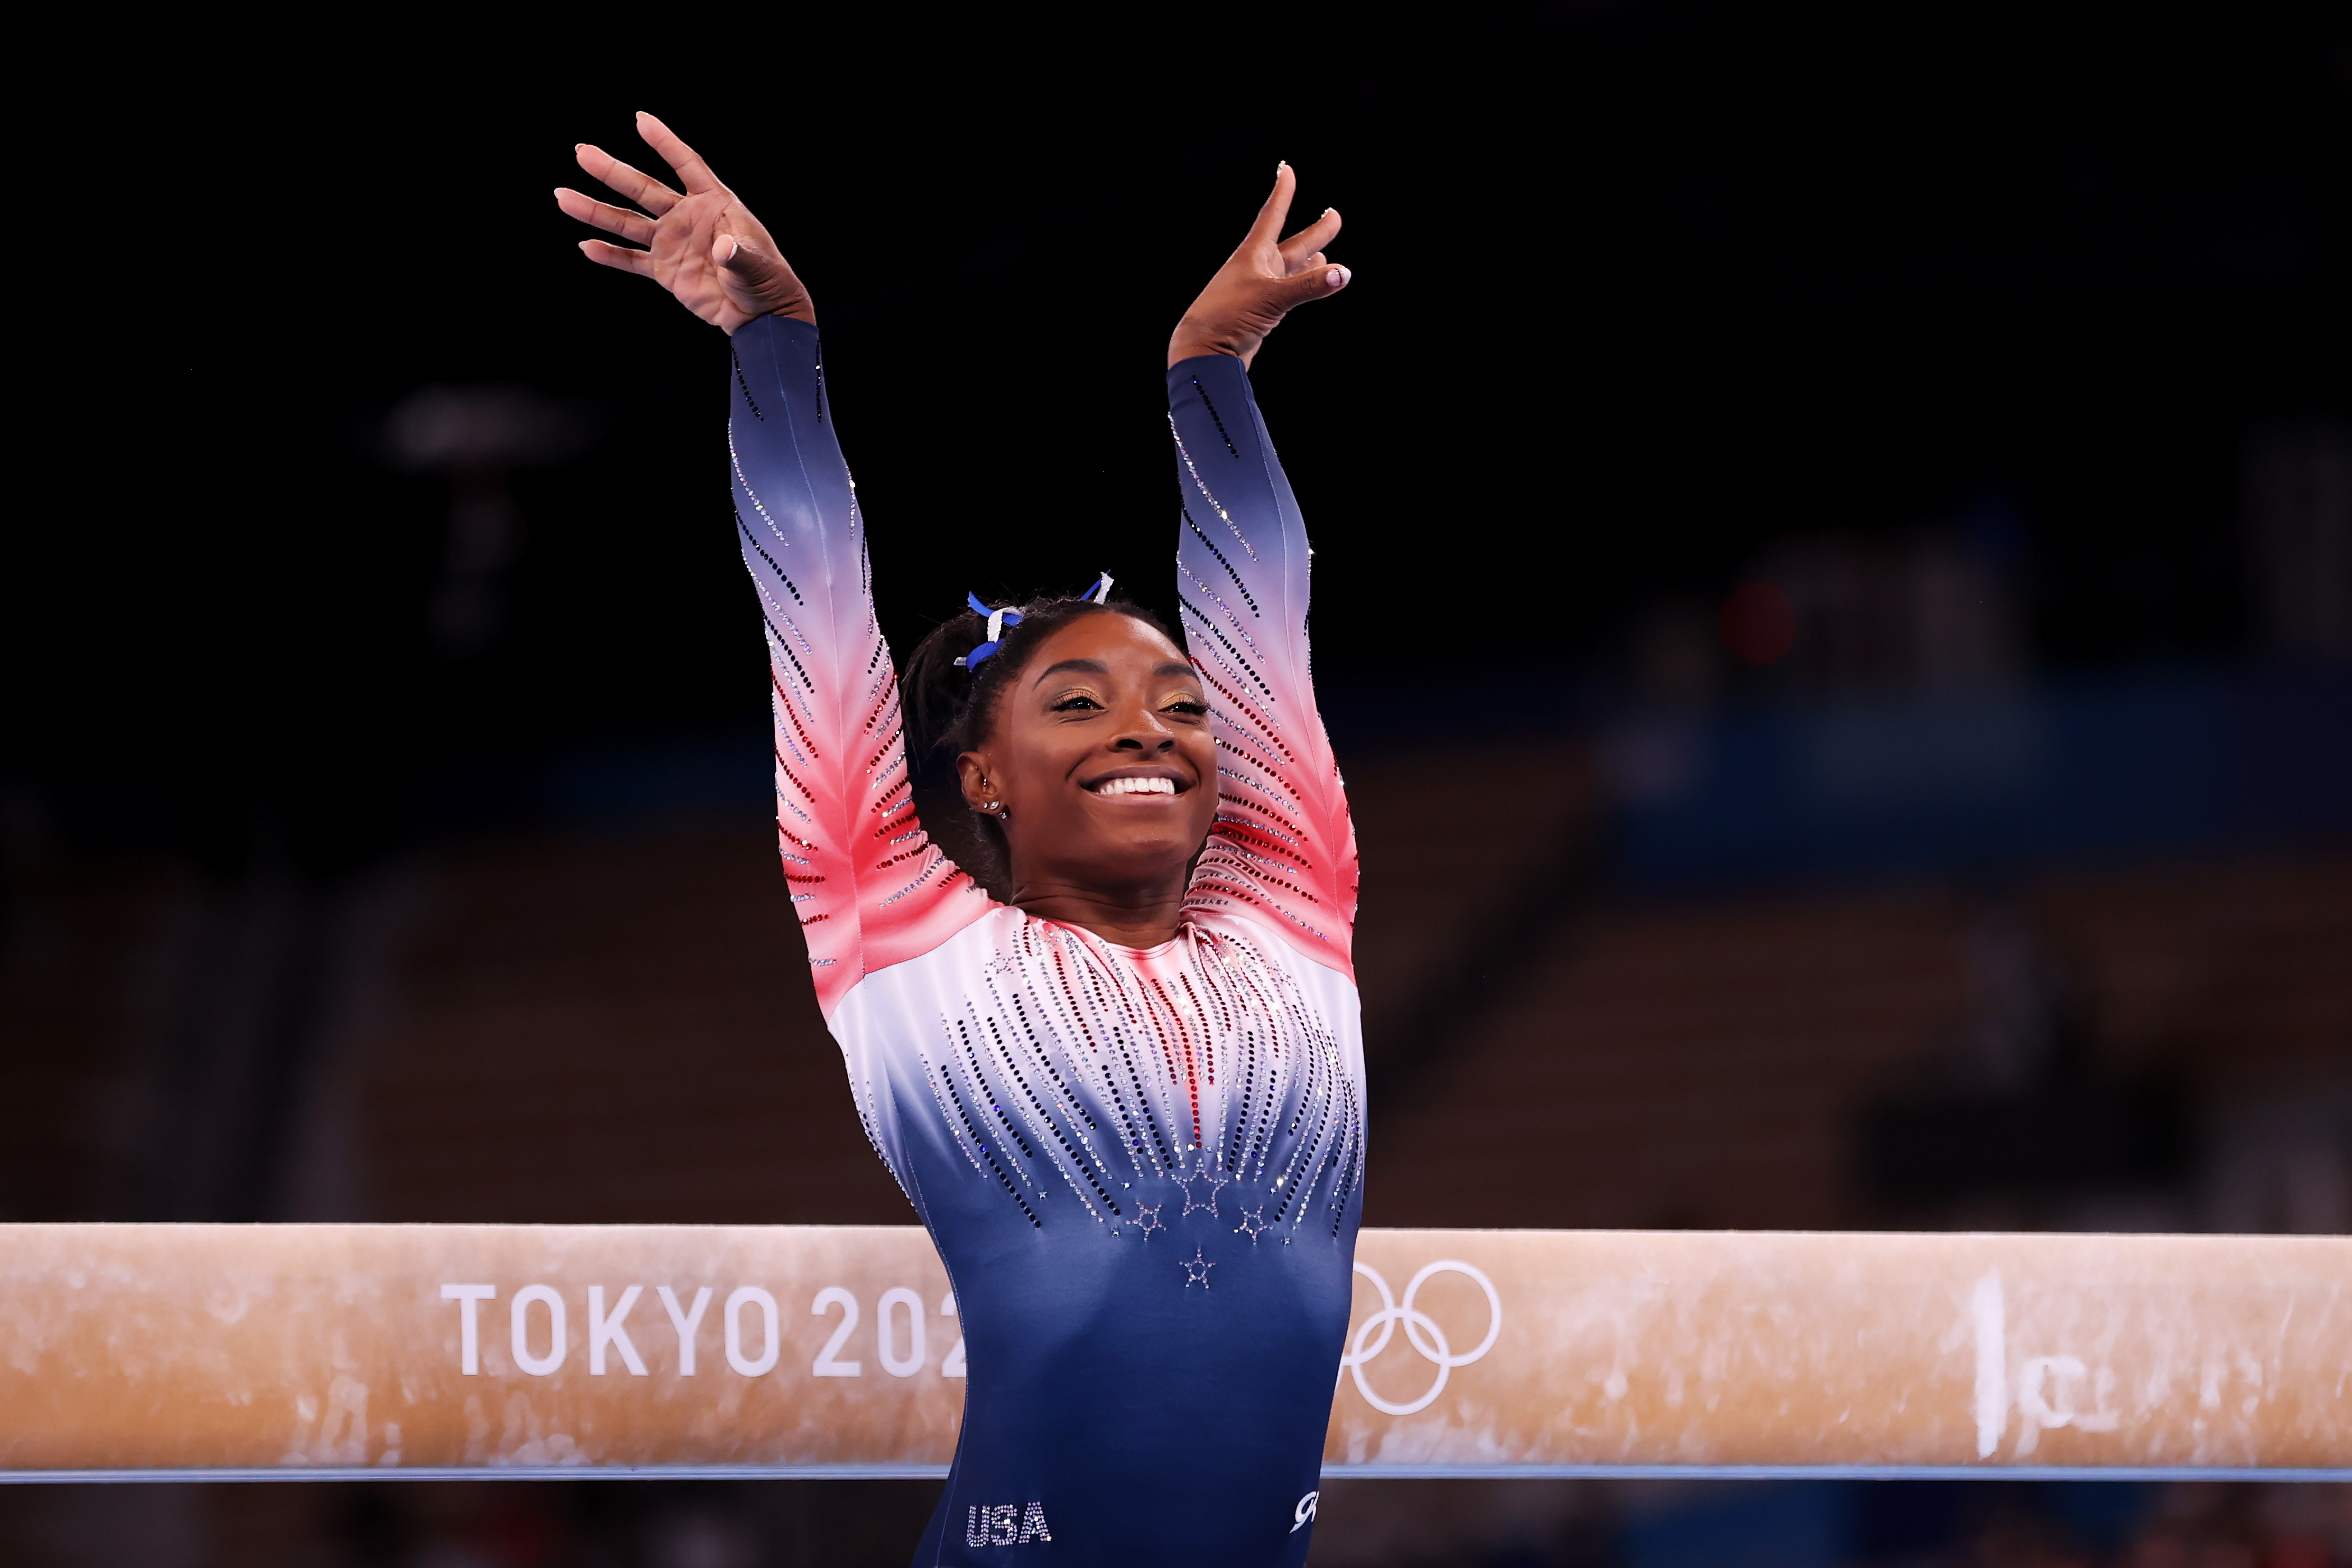 Simone Biles of Team United States competes during the Women's Balance Beam Final on day eleven of the Tokyo 2020 Olympic Games at Ariake Gymnastics Centre on August 03, 2021 in Tokyo, Japan. | Source: Getty Images